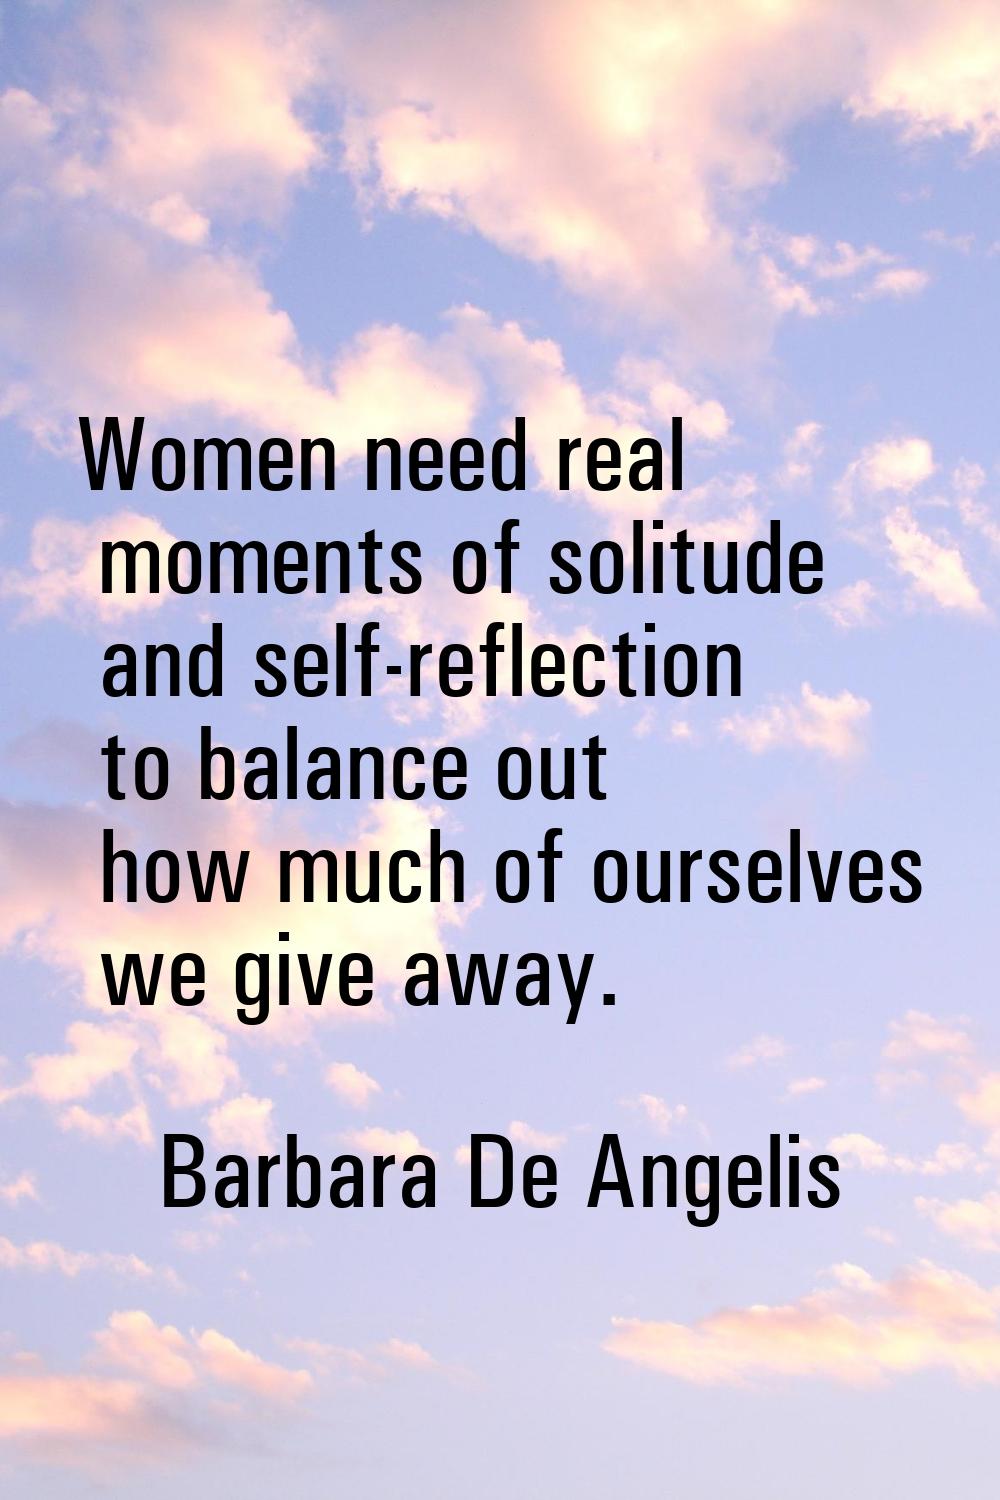 Women need real moments of solitude and self-reflection to balance out how much of ourselves we giv